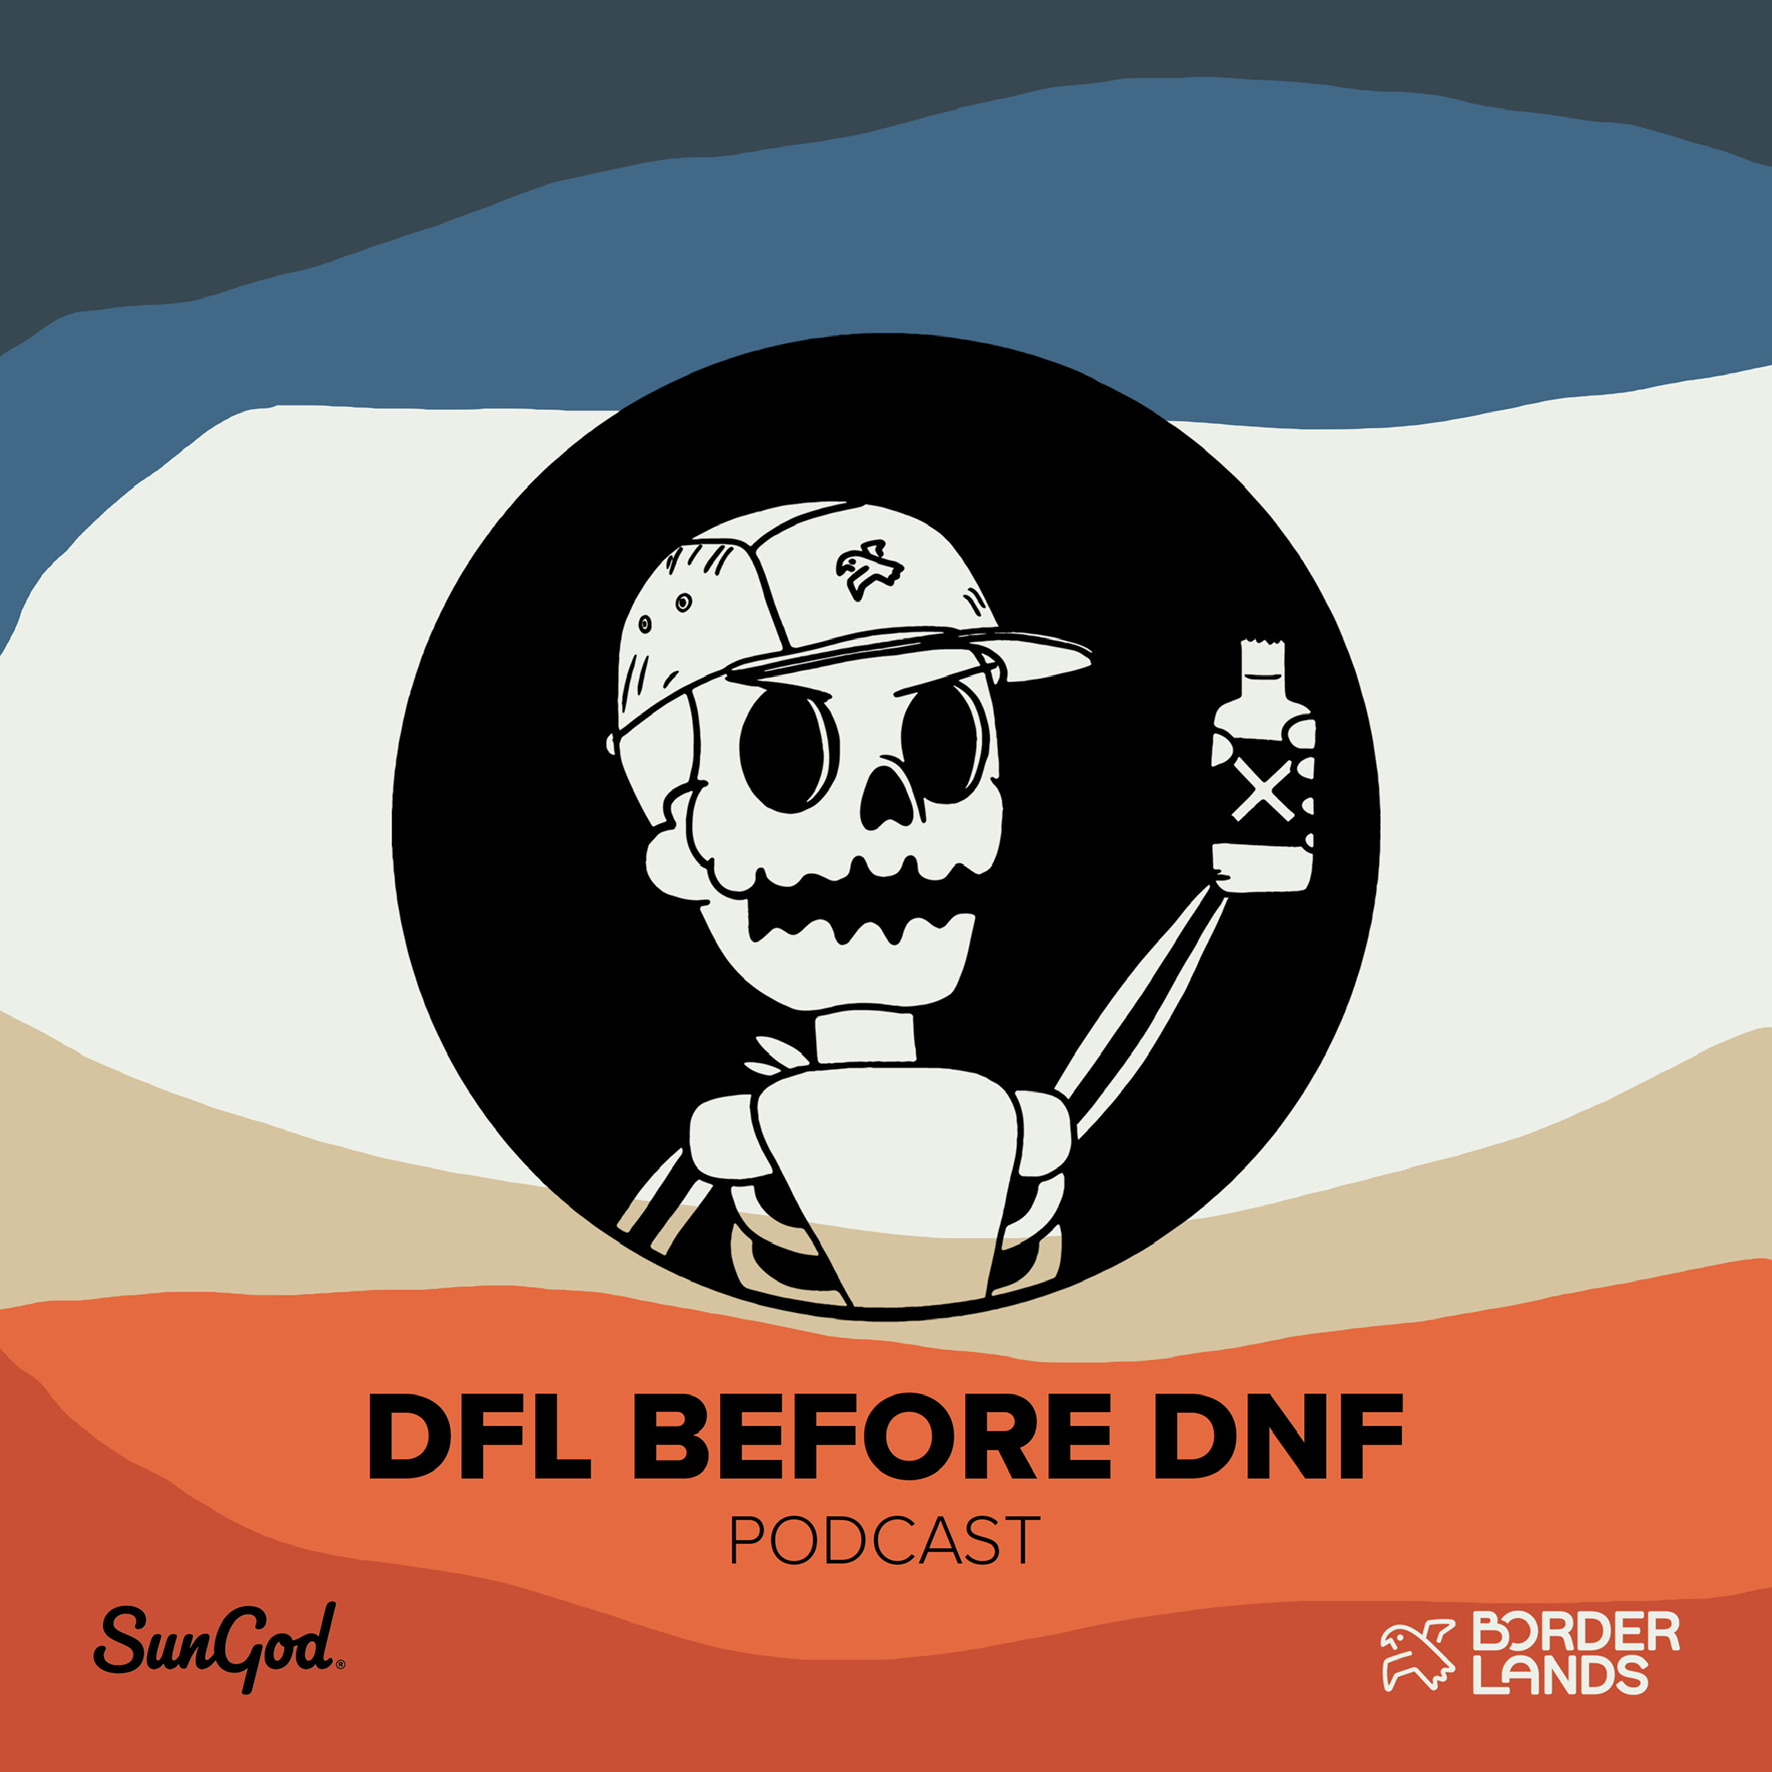 Spotify - DFL BEFORE DNF PODCAST thumbnail